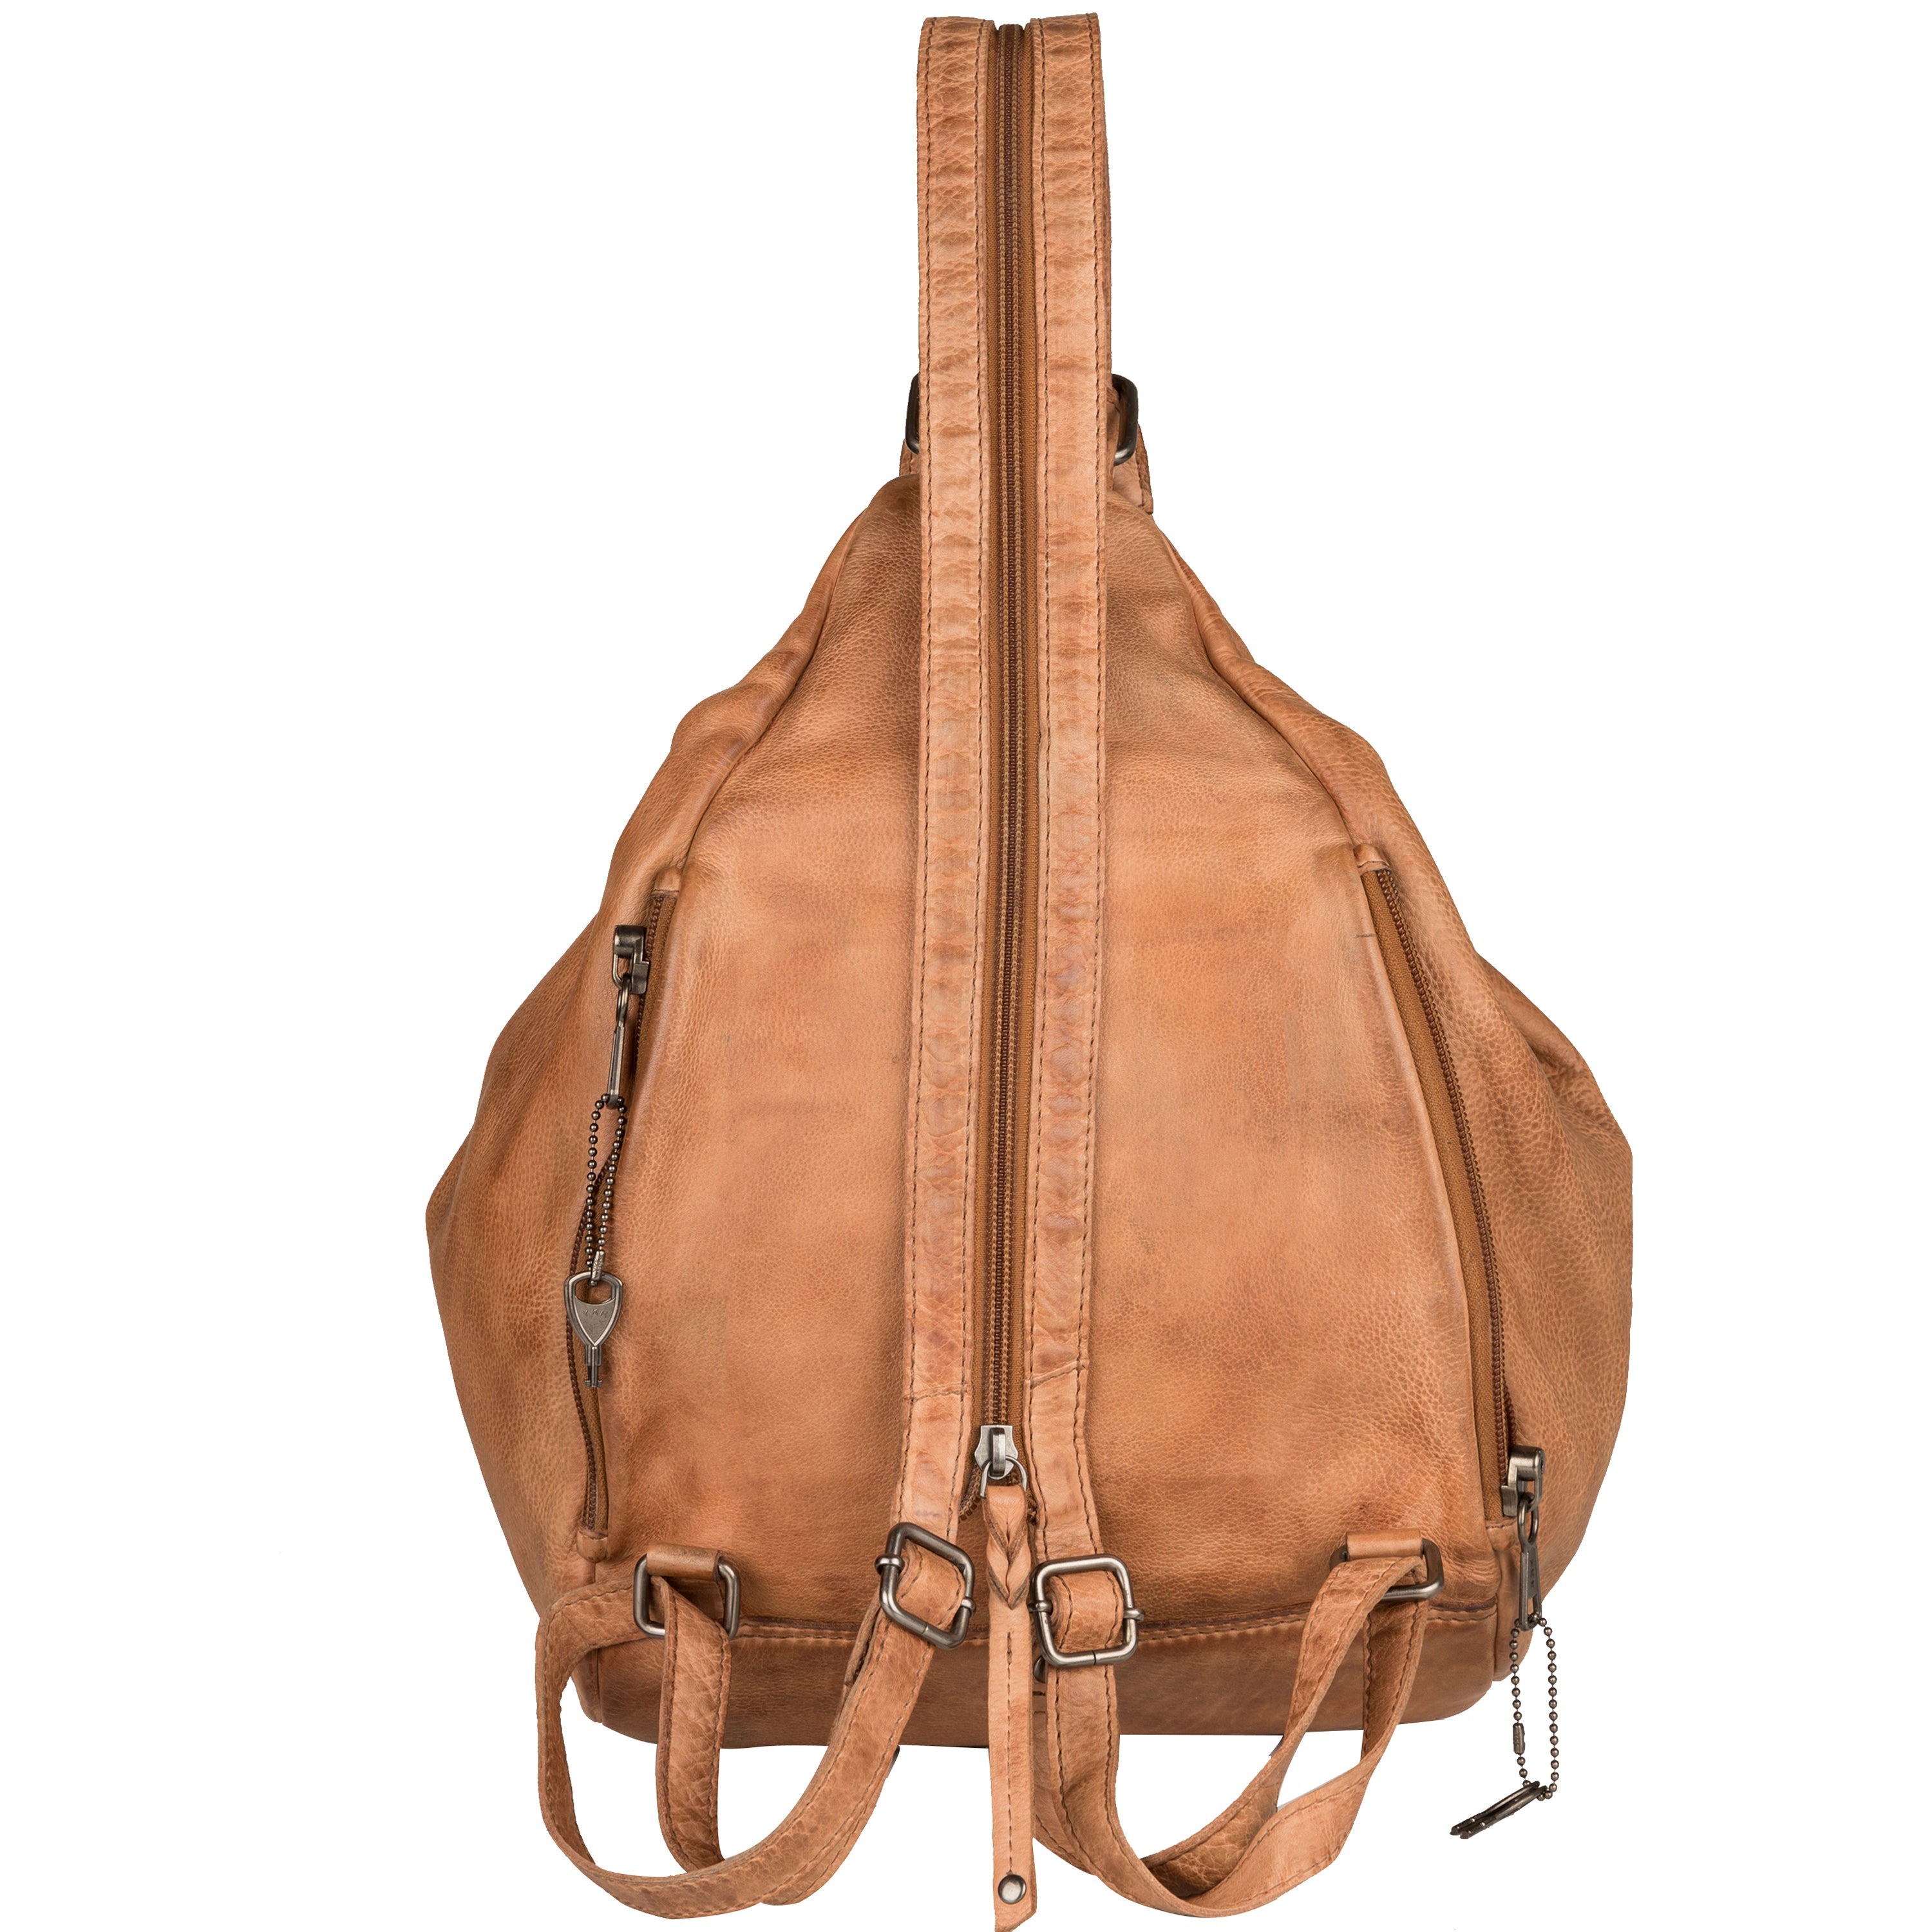 Concealed Carry Marley Unisex Backpack - YKK Locking Zippers and Universal Holsters for Gun - Outdoor Bag for Gun Owner - Backpack for Conceal Carry - best gun carry backpack - Pistol and Firearm Bag - Western Hide Backpack - Boho Stylish Backpack for Women - Universal Holster Bag - Marley Unisex Backpack - Women's Concealed Carry Bagpack - premium leather backpack